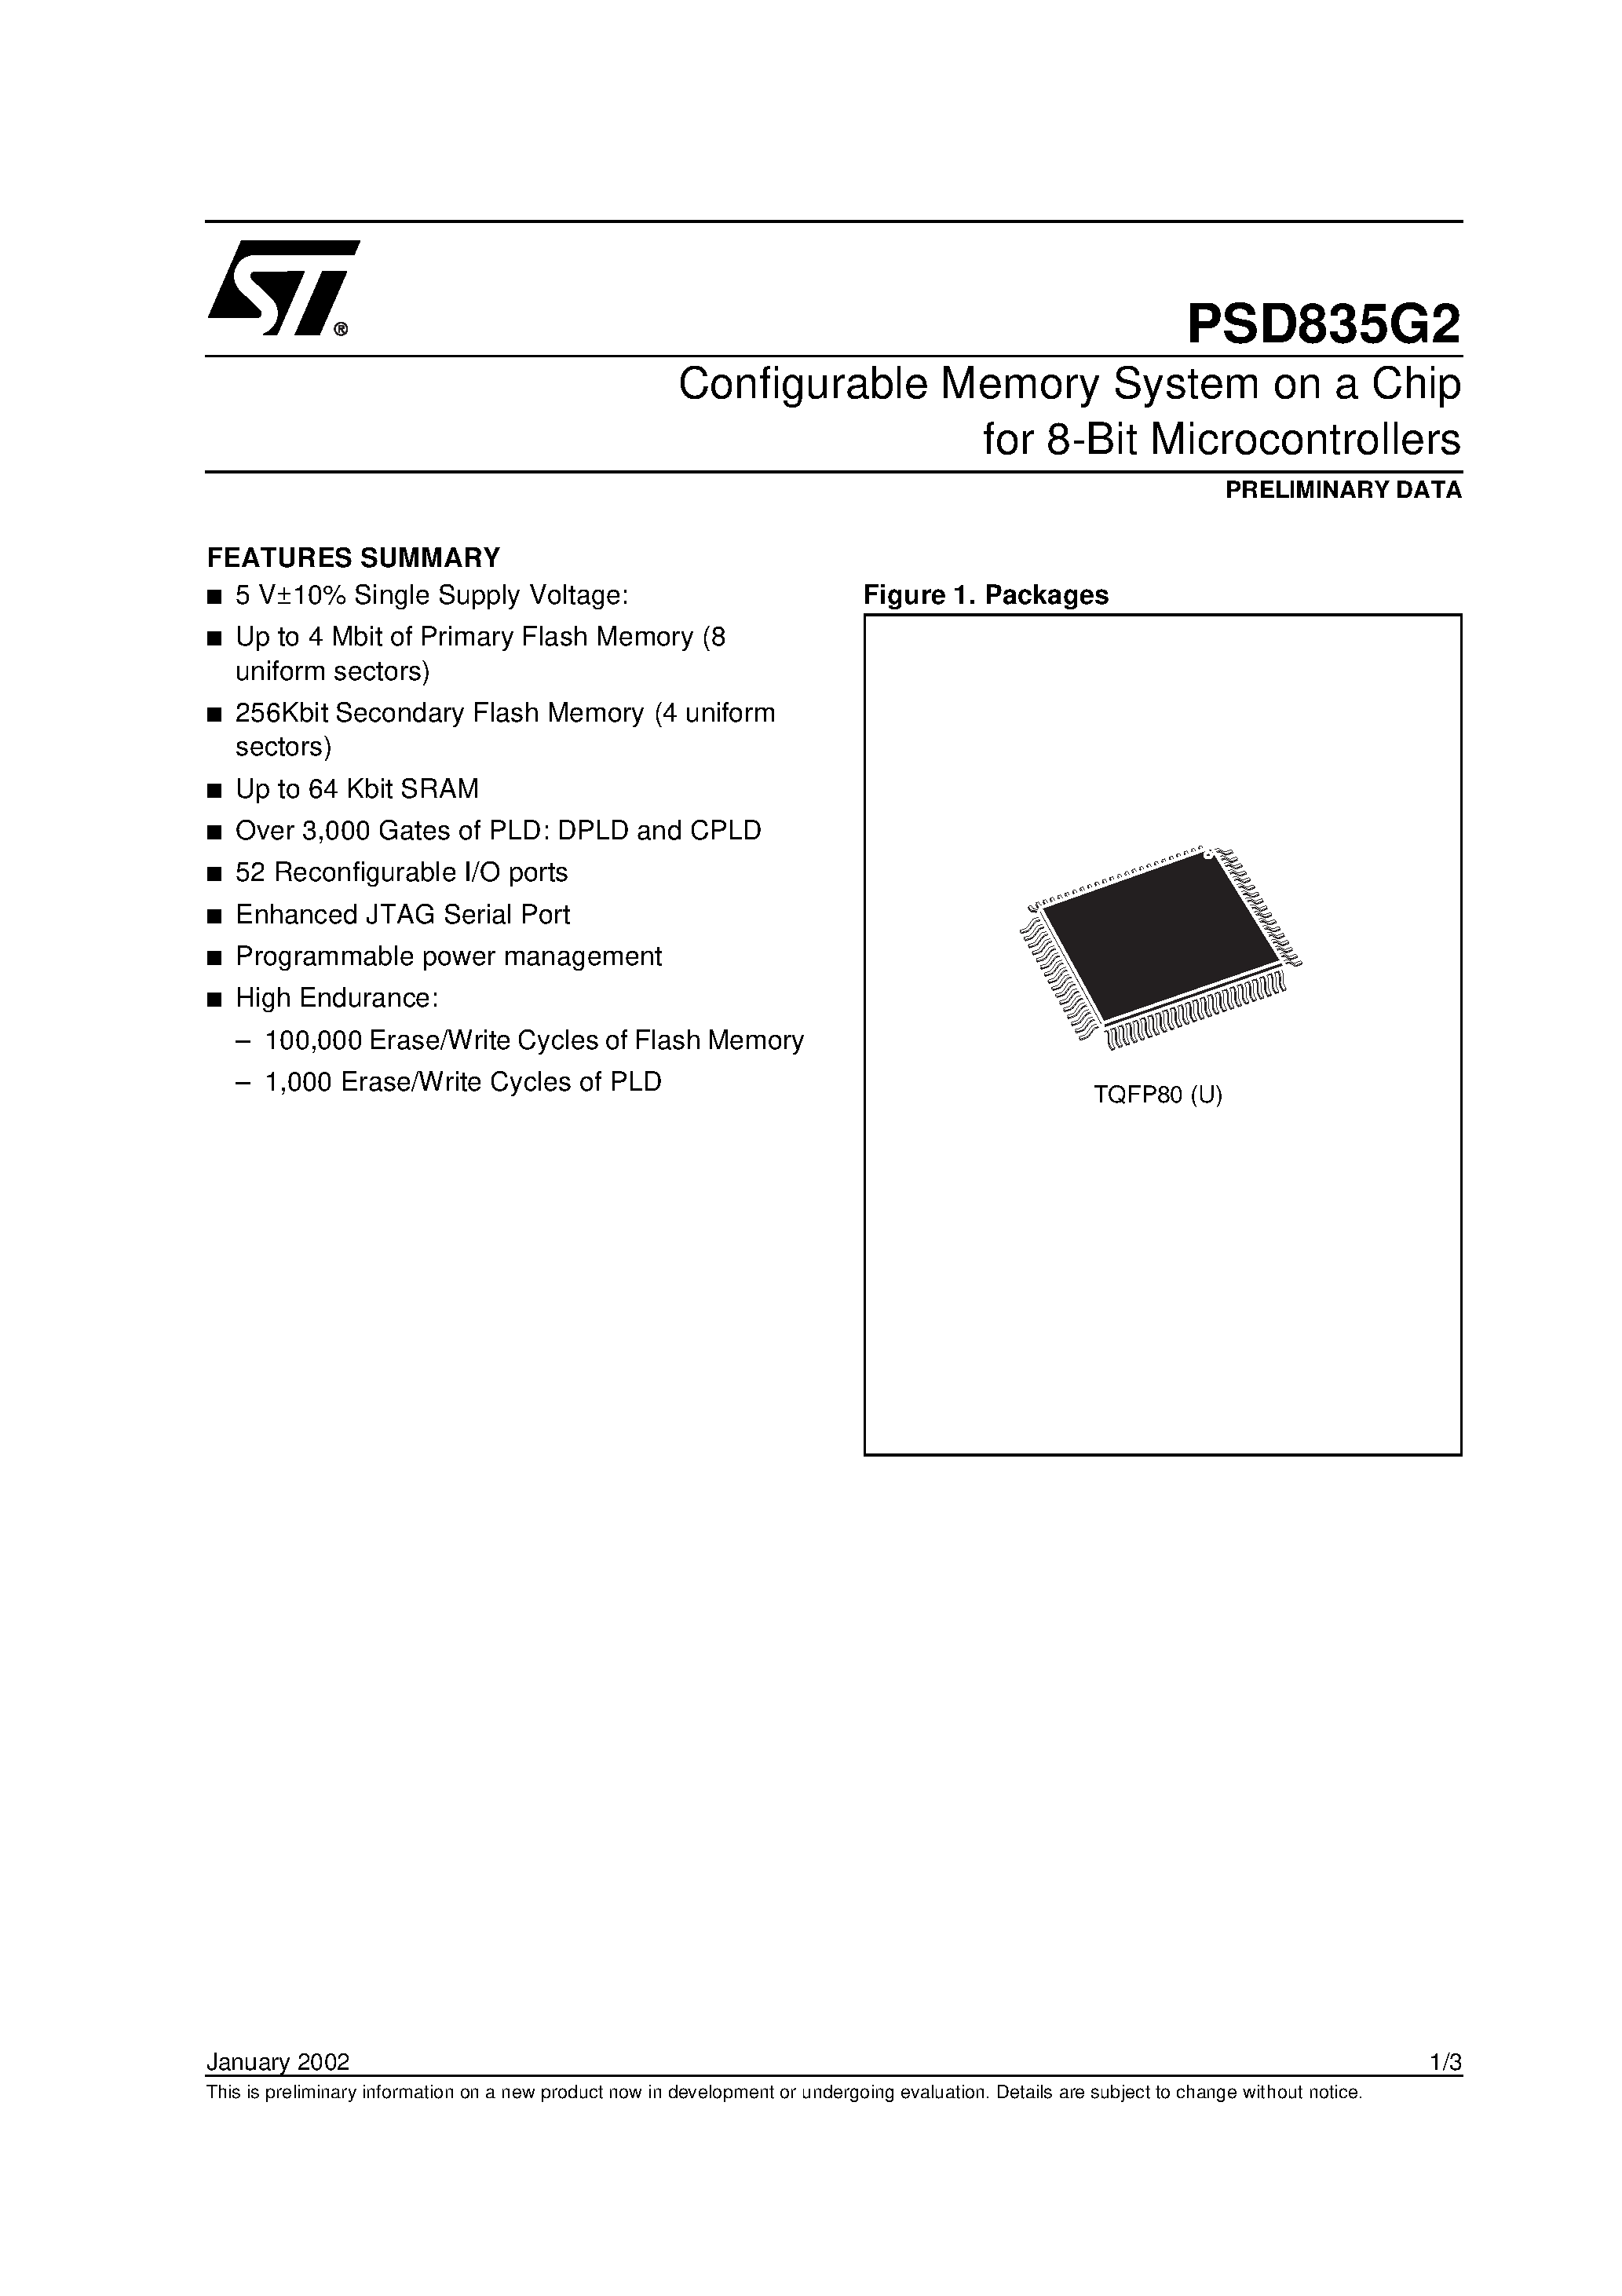 Datasheet PSD835F1V-A-20J - Configurable Memory System on a Chip for 8-Bit Microcontrollers page 1